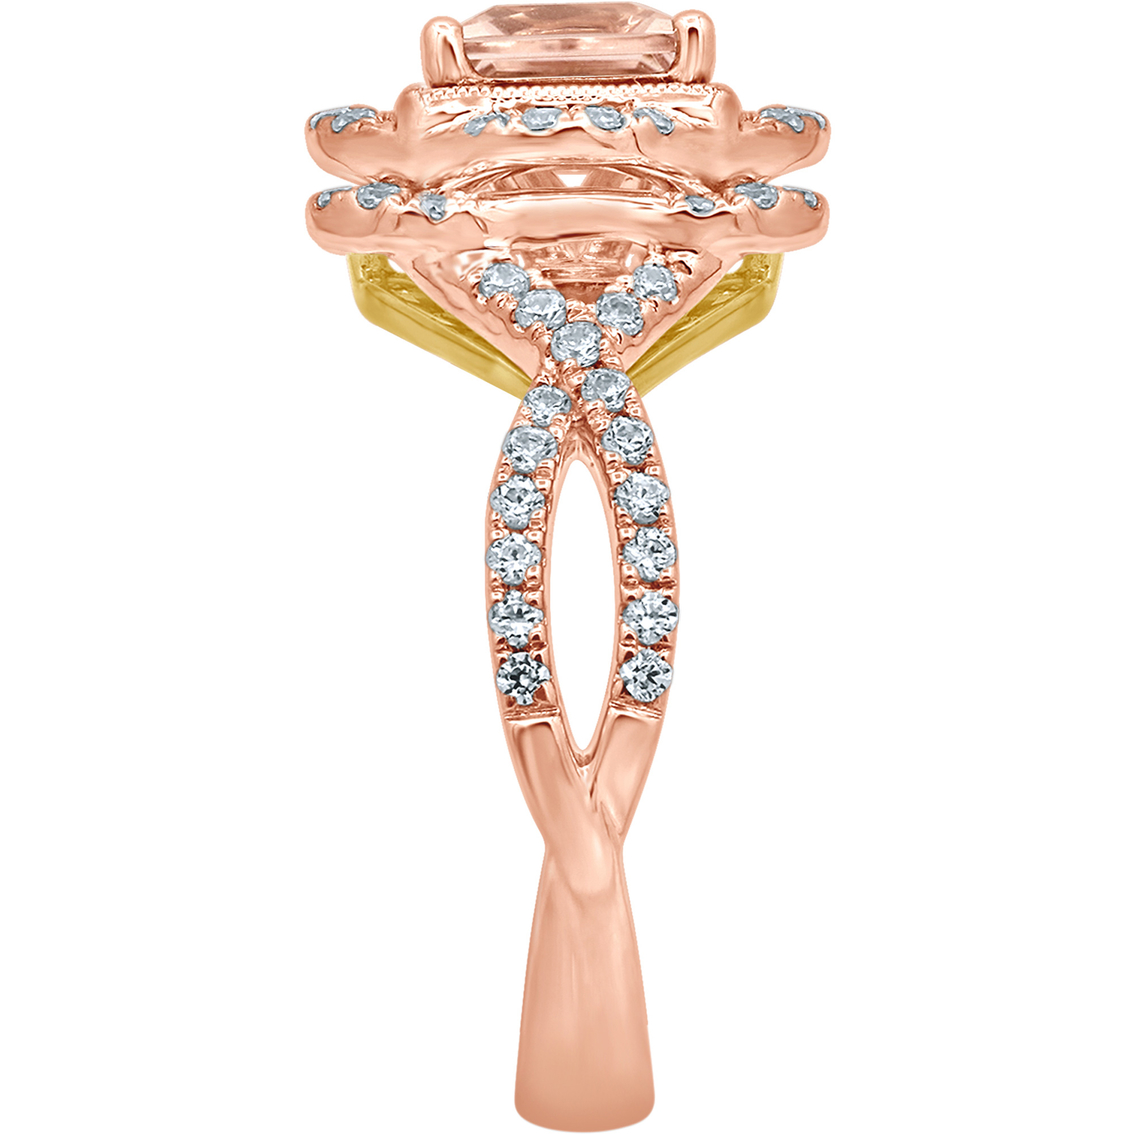 Truly Zac Posen 14K Two Tone Gold Morganite and 1/2 CTW Diamond Engagement Ring - Image 2 of 3